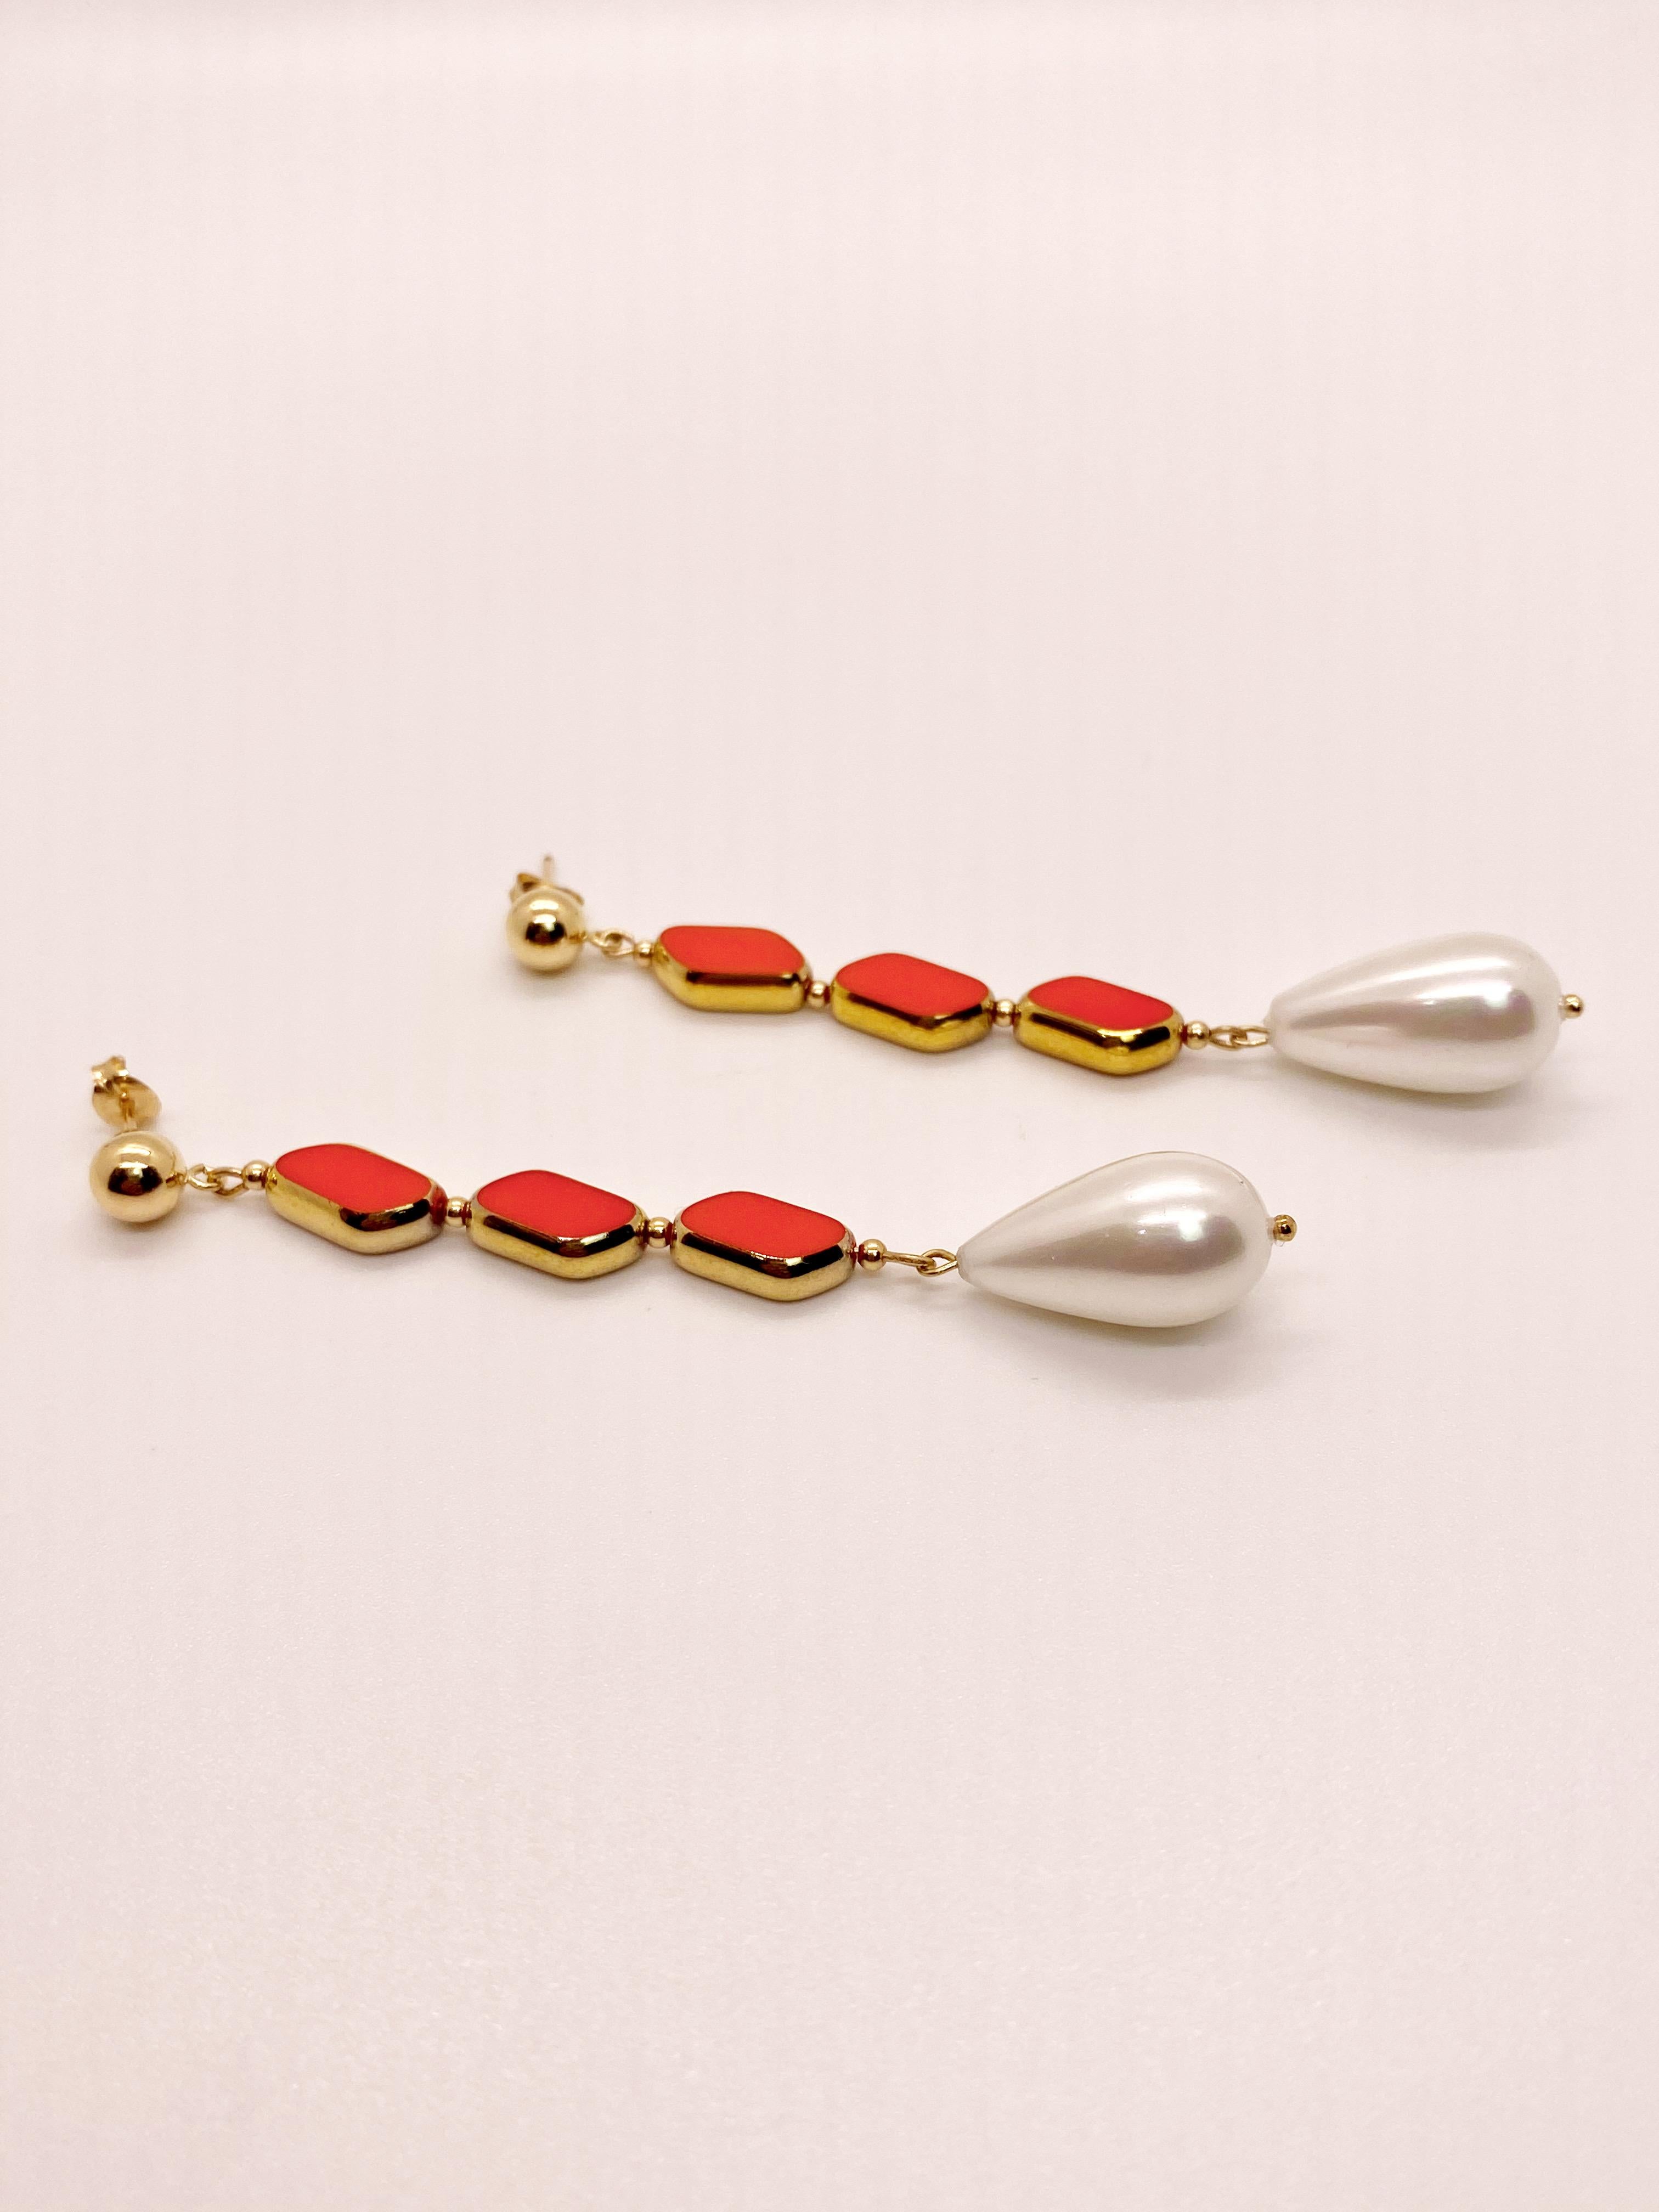 Contemporary Vintage German Glass Beads edged with 24K gold, Marmalade Pearl Earrings For Sale